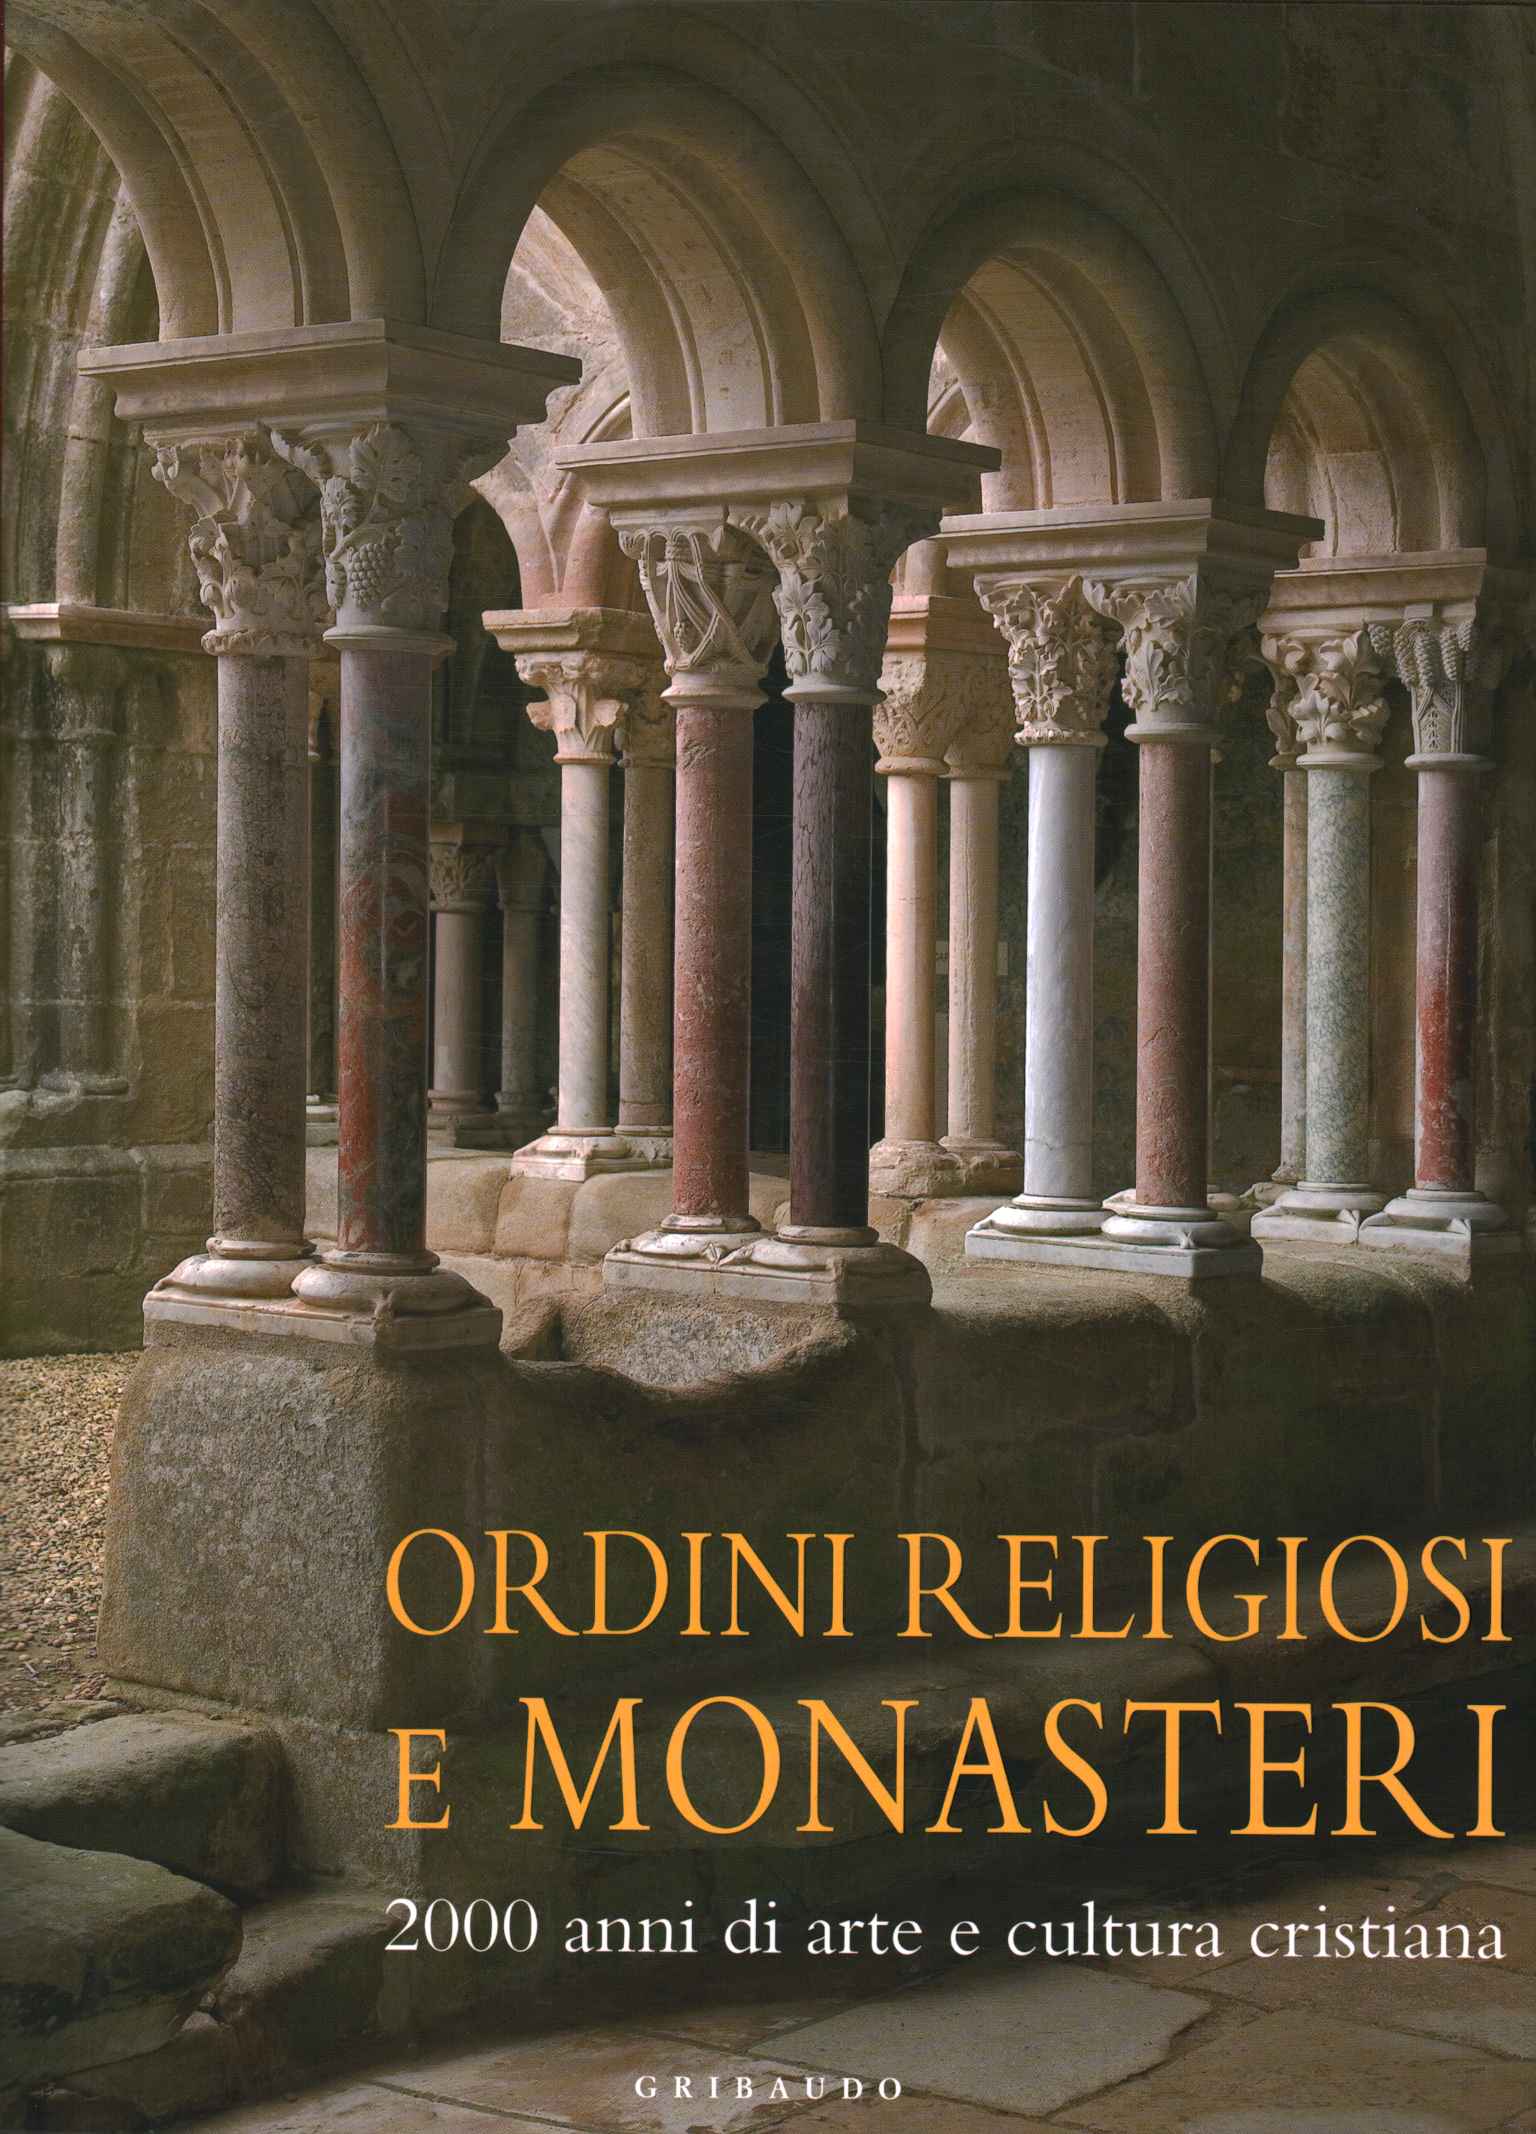 Religious orders and monasteries